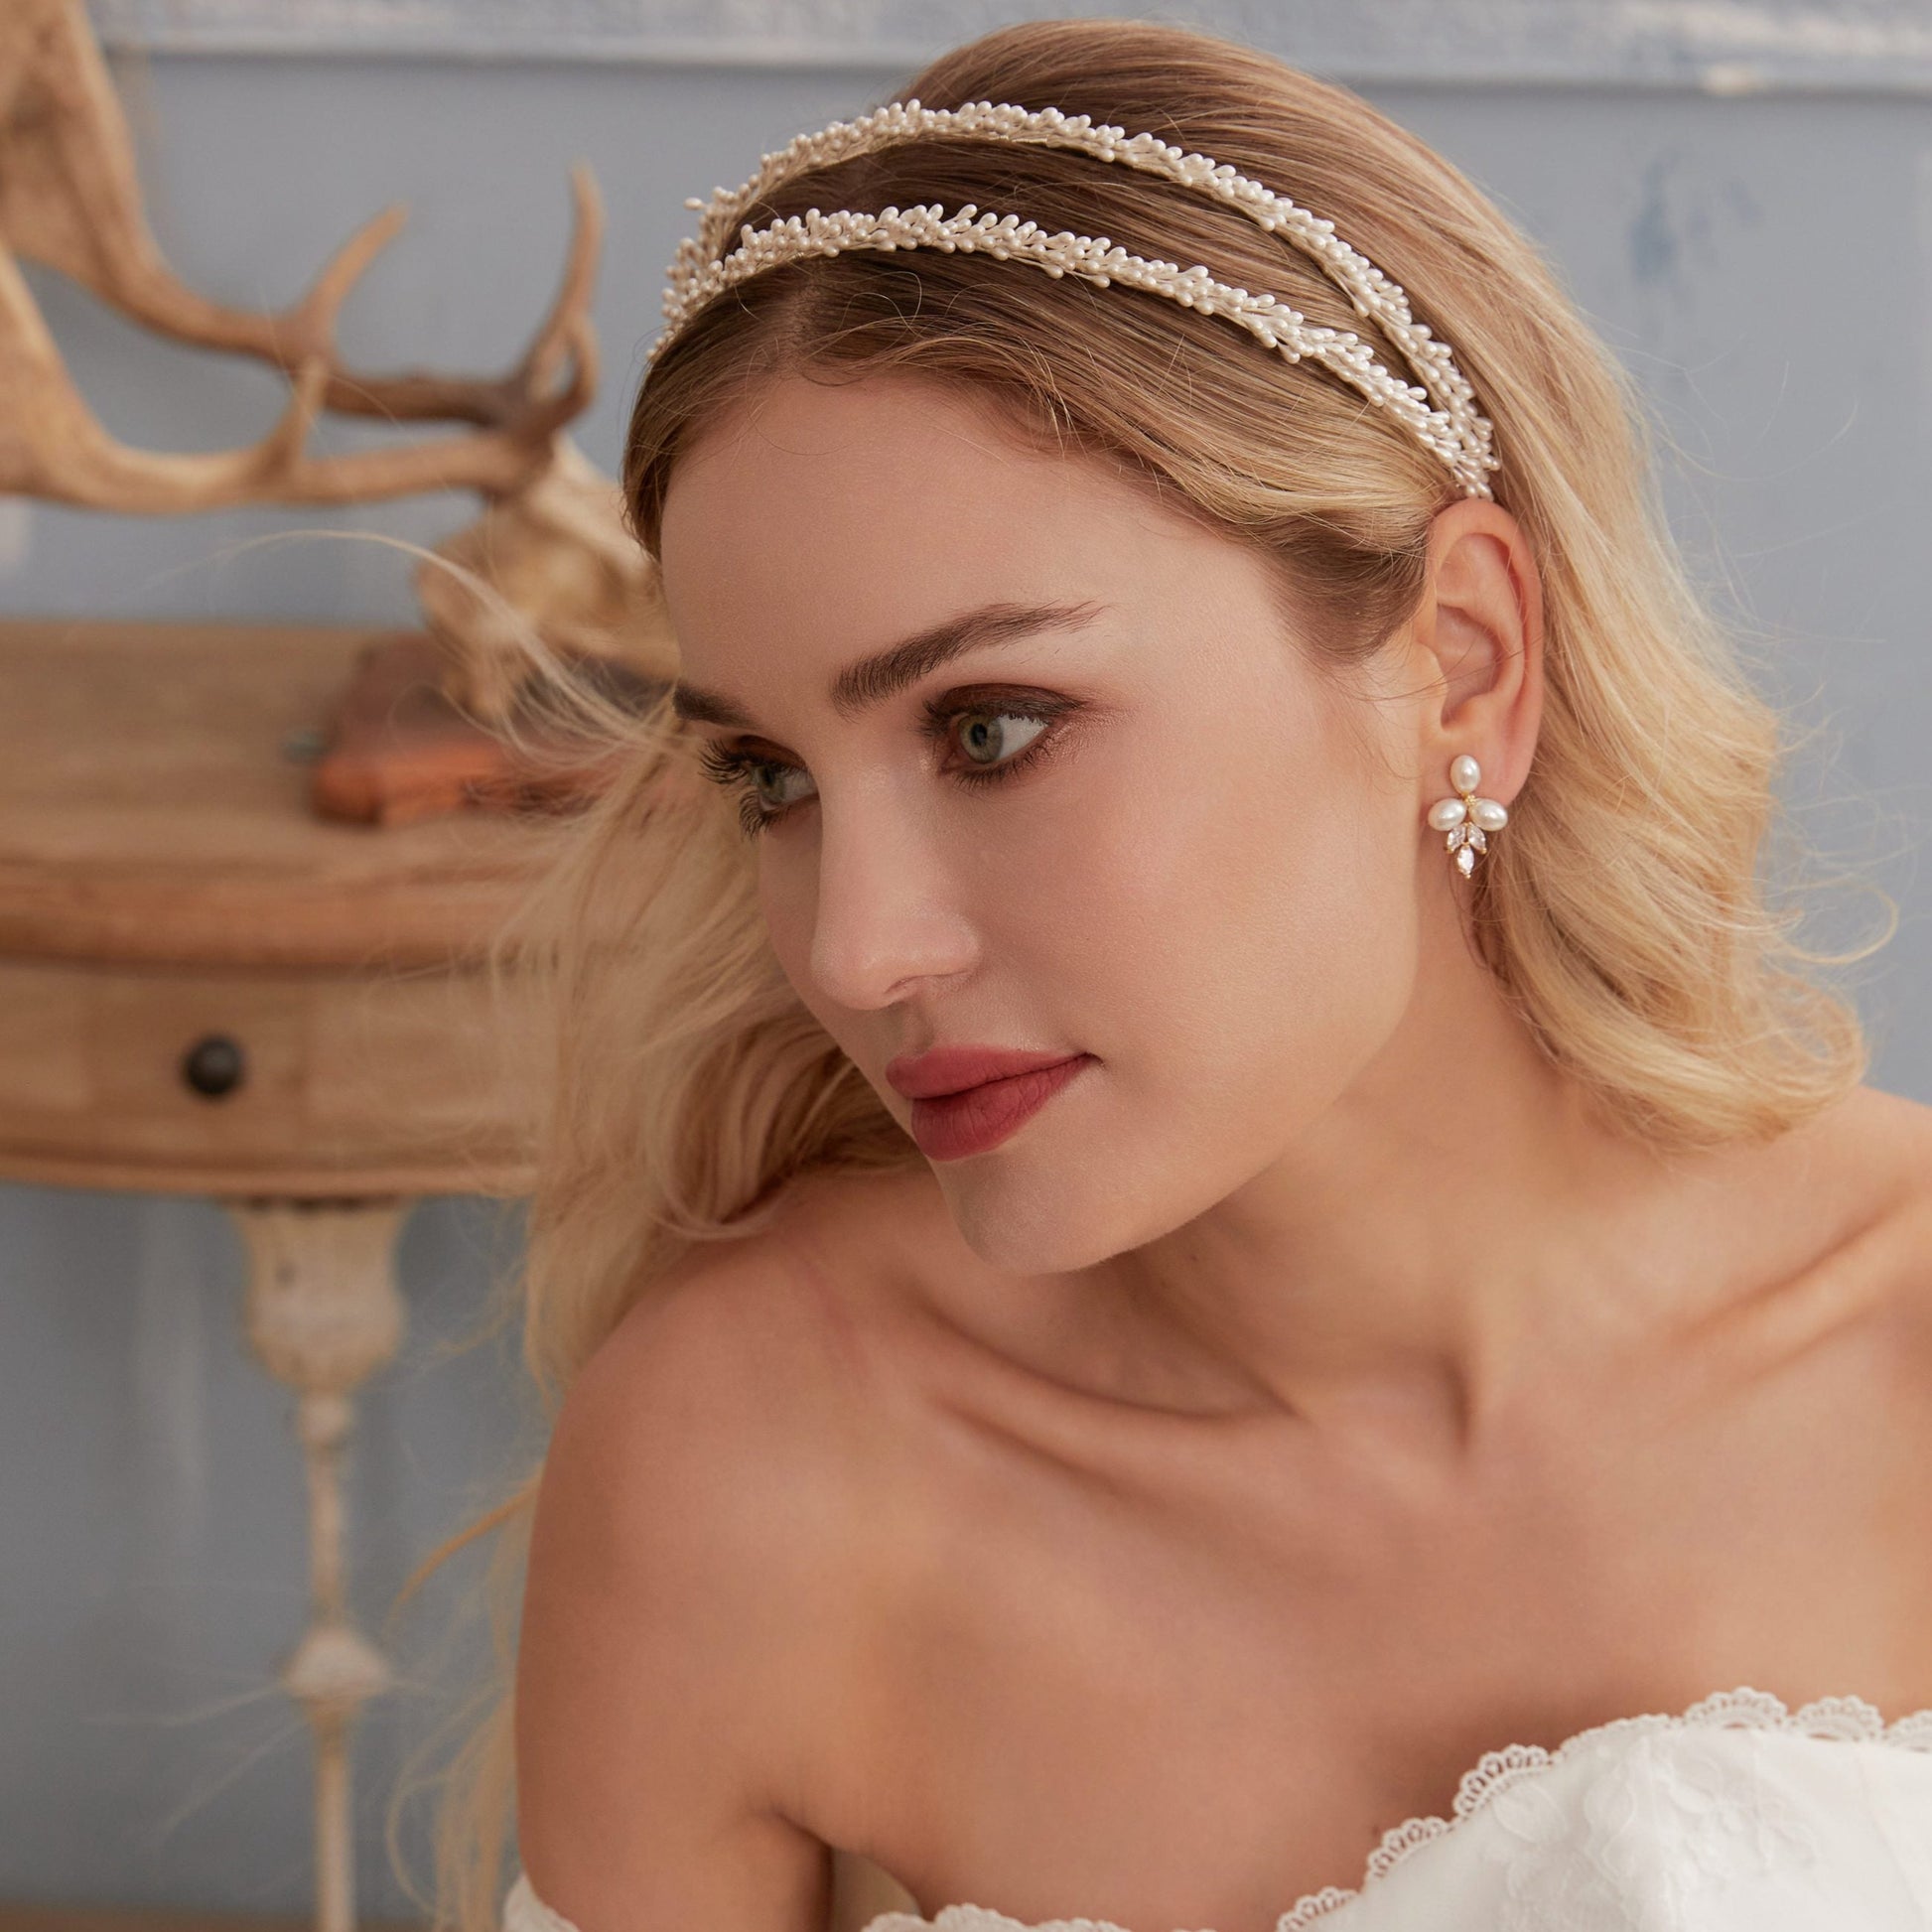 Stunning Baby's Breath-inspired wedding headband. Featuring two rows of delicate faux pearls resembling Baby's Breath flowers, this stunning bridal accessory adds a touch of magic to your wedding look.